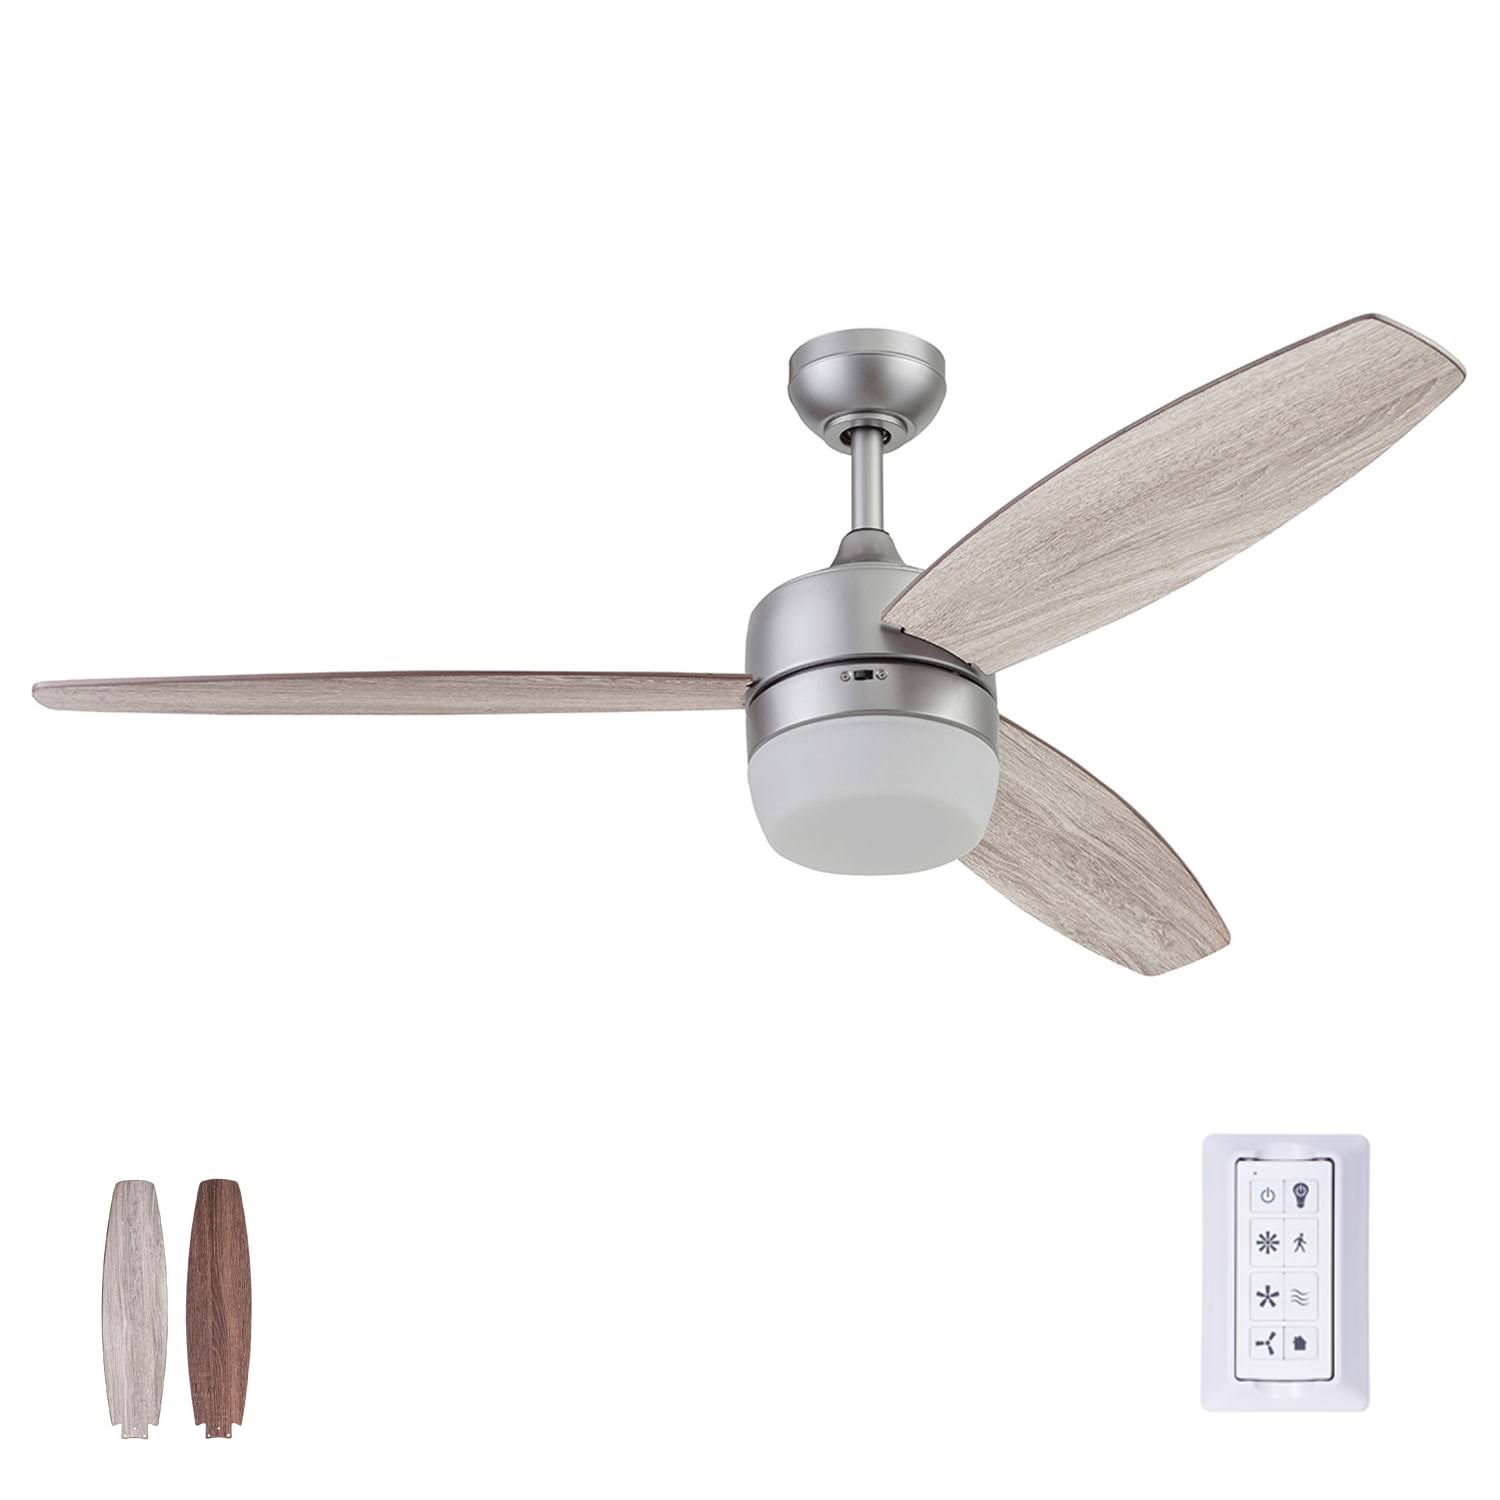 Prominence Home 51643-01 Enoki IO Ceiling Fan, 52, Pewter